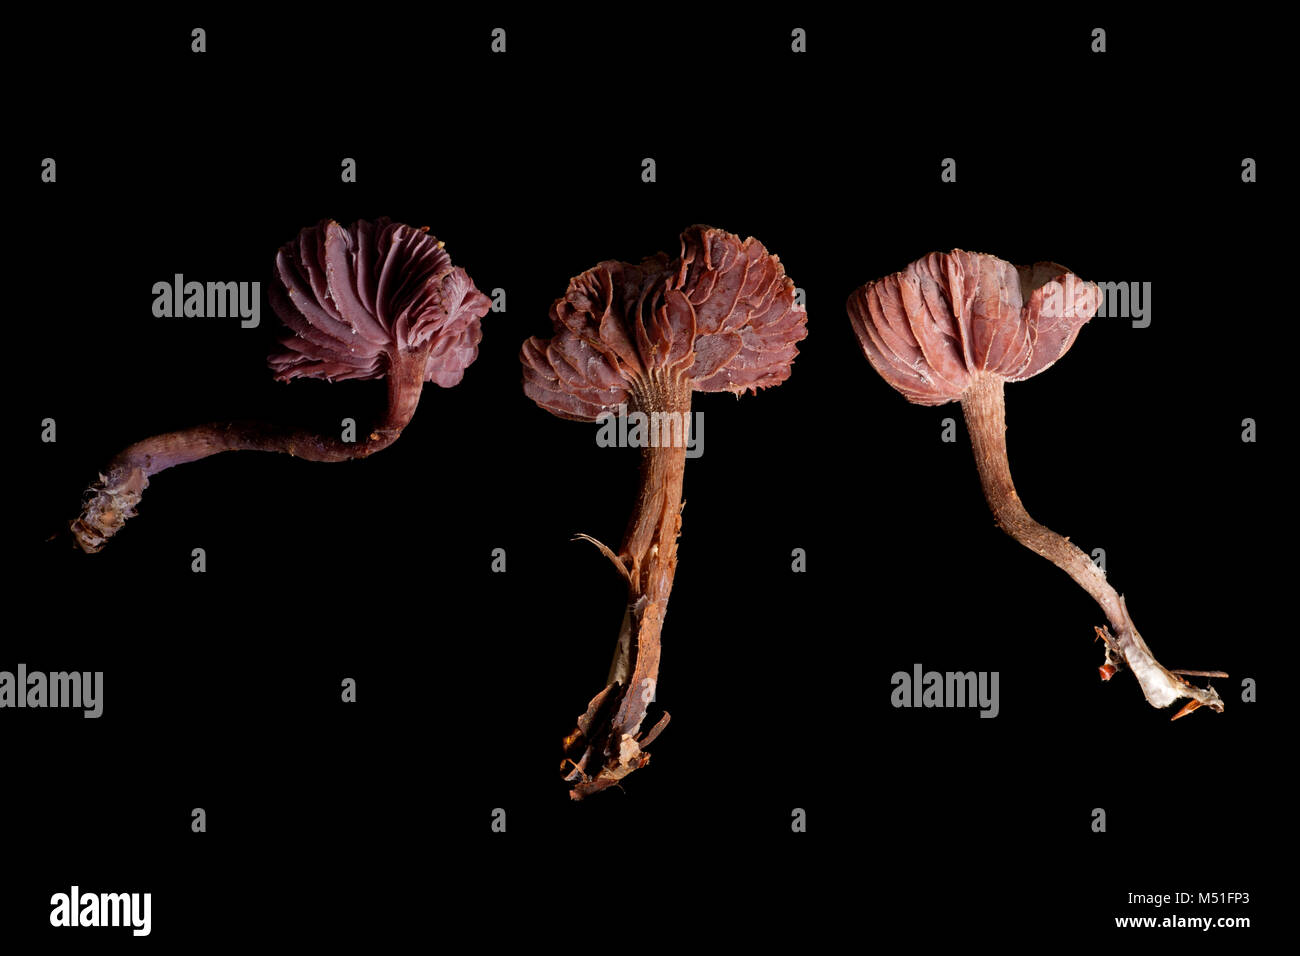 Studio picture of three amethyst deceiver toadstools, Laccaria amethystina. Dorset England UK GB on a black background Stock Photo